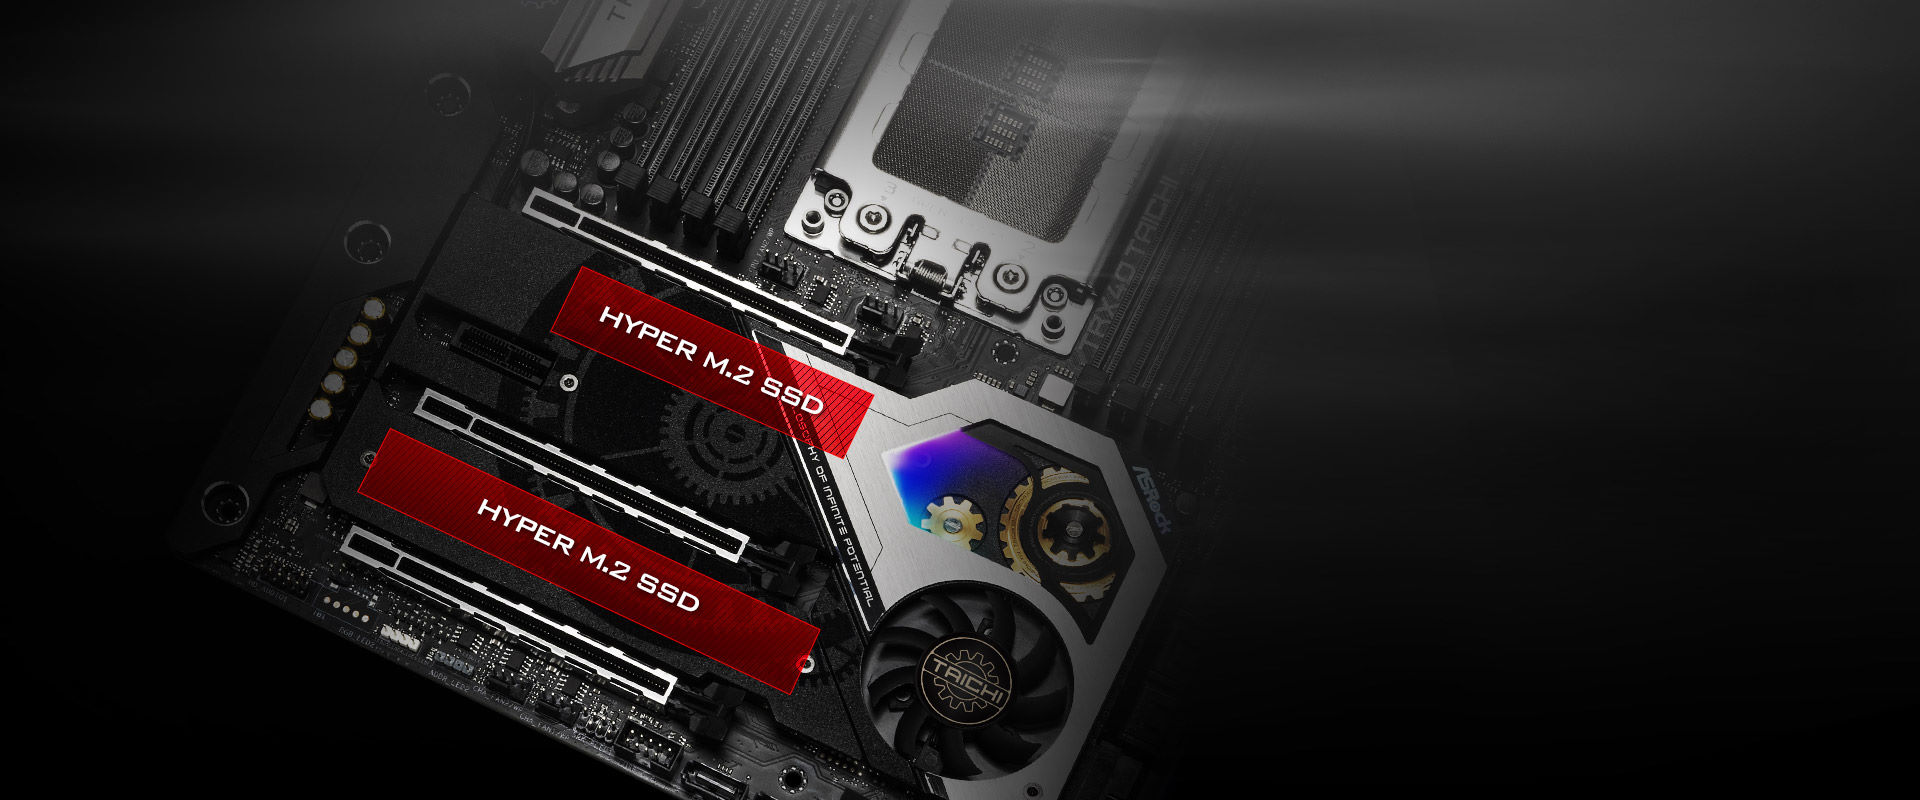 the detail of the Dual Hyper M.2 For SSD and M.2 Armors of the motherboard